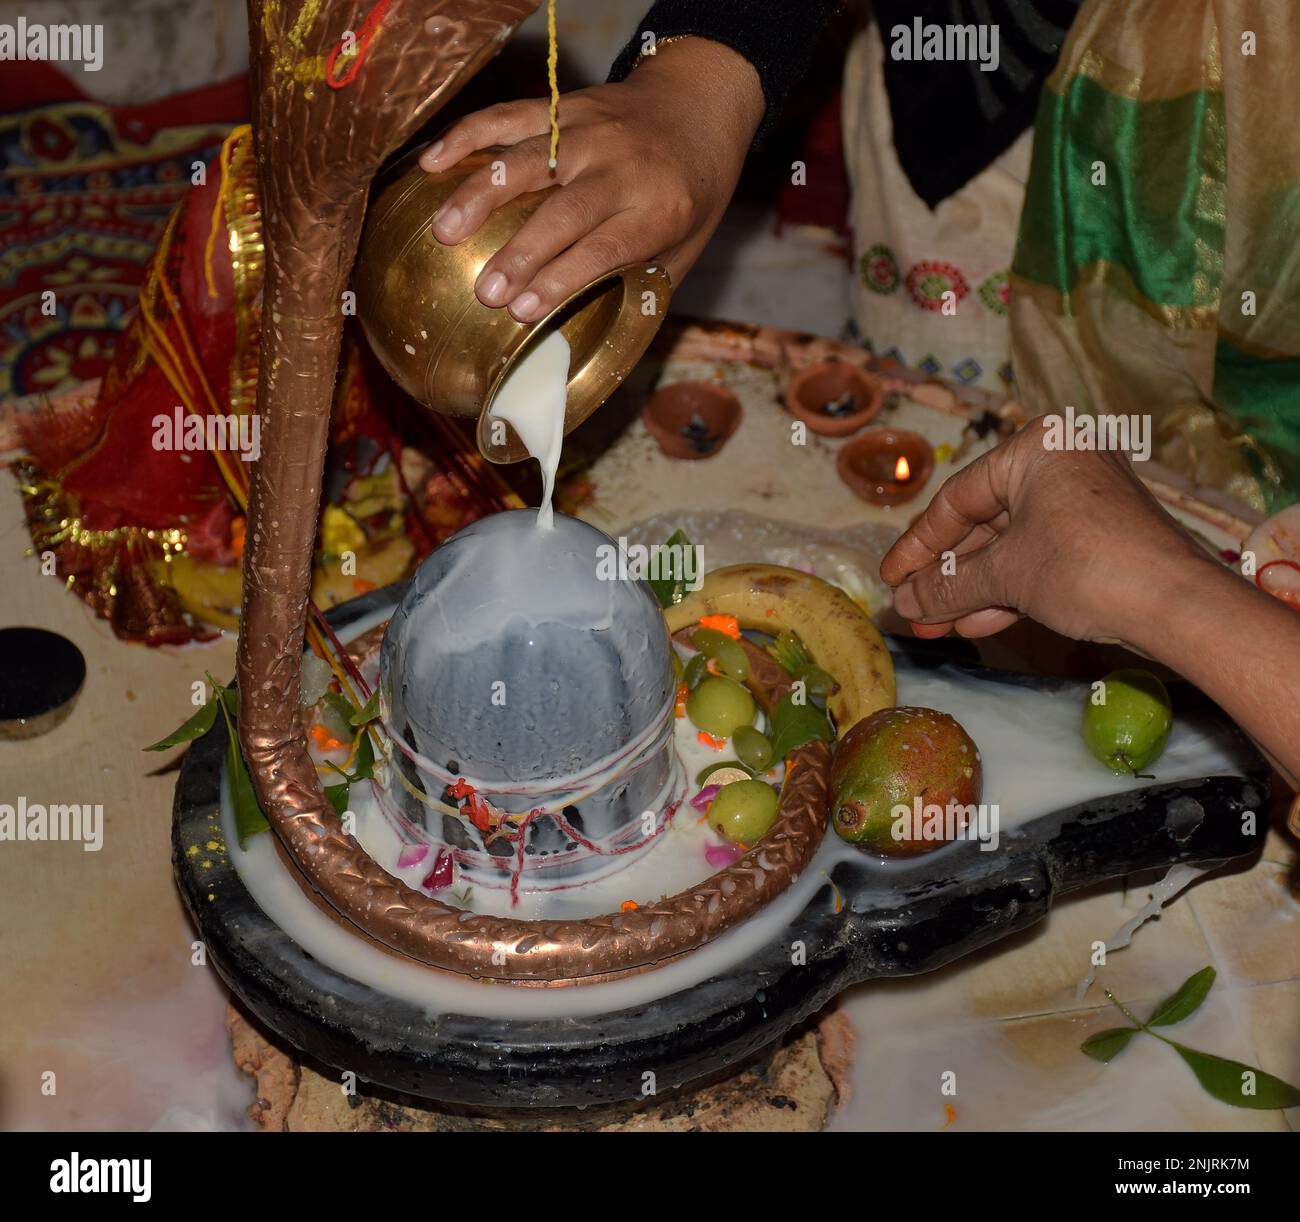 hand of a devotee offering milk to shivling or lord shiva on the occasion of maha shivratri festival celebration in india 2NJRK7M